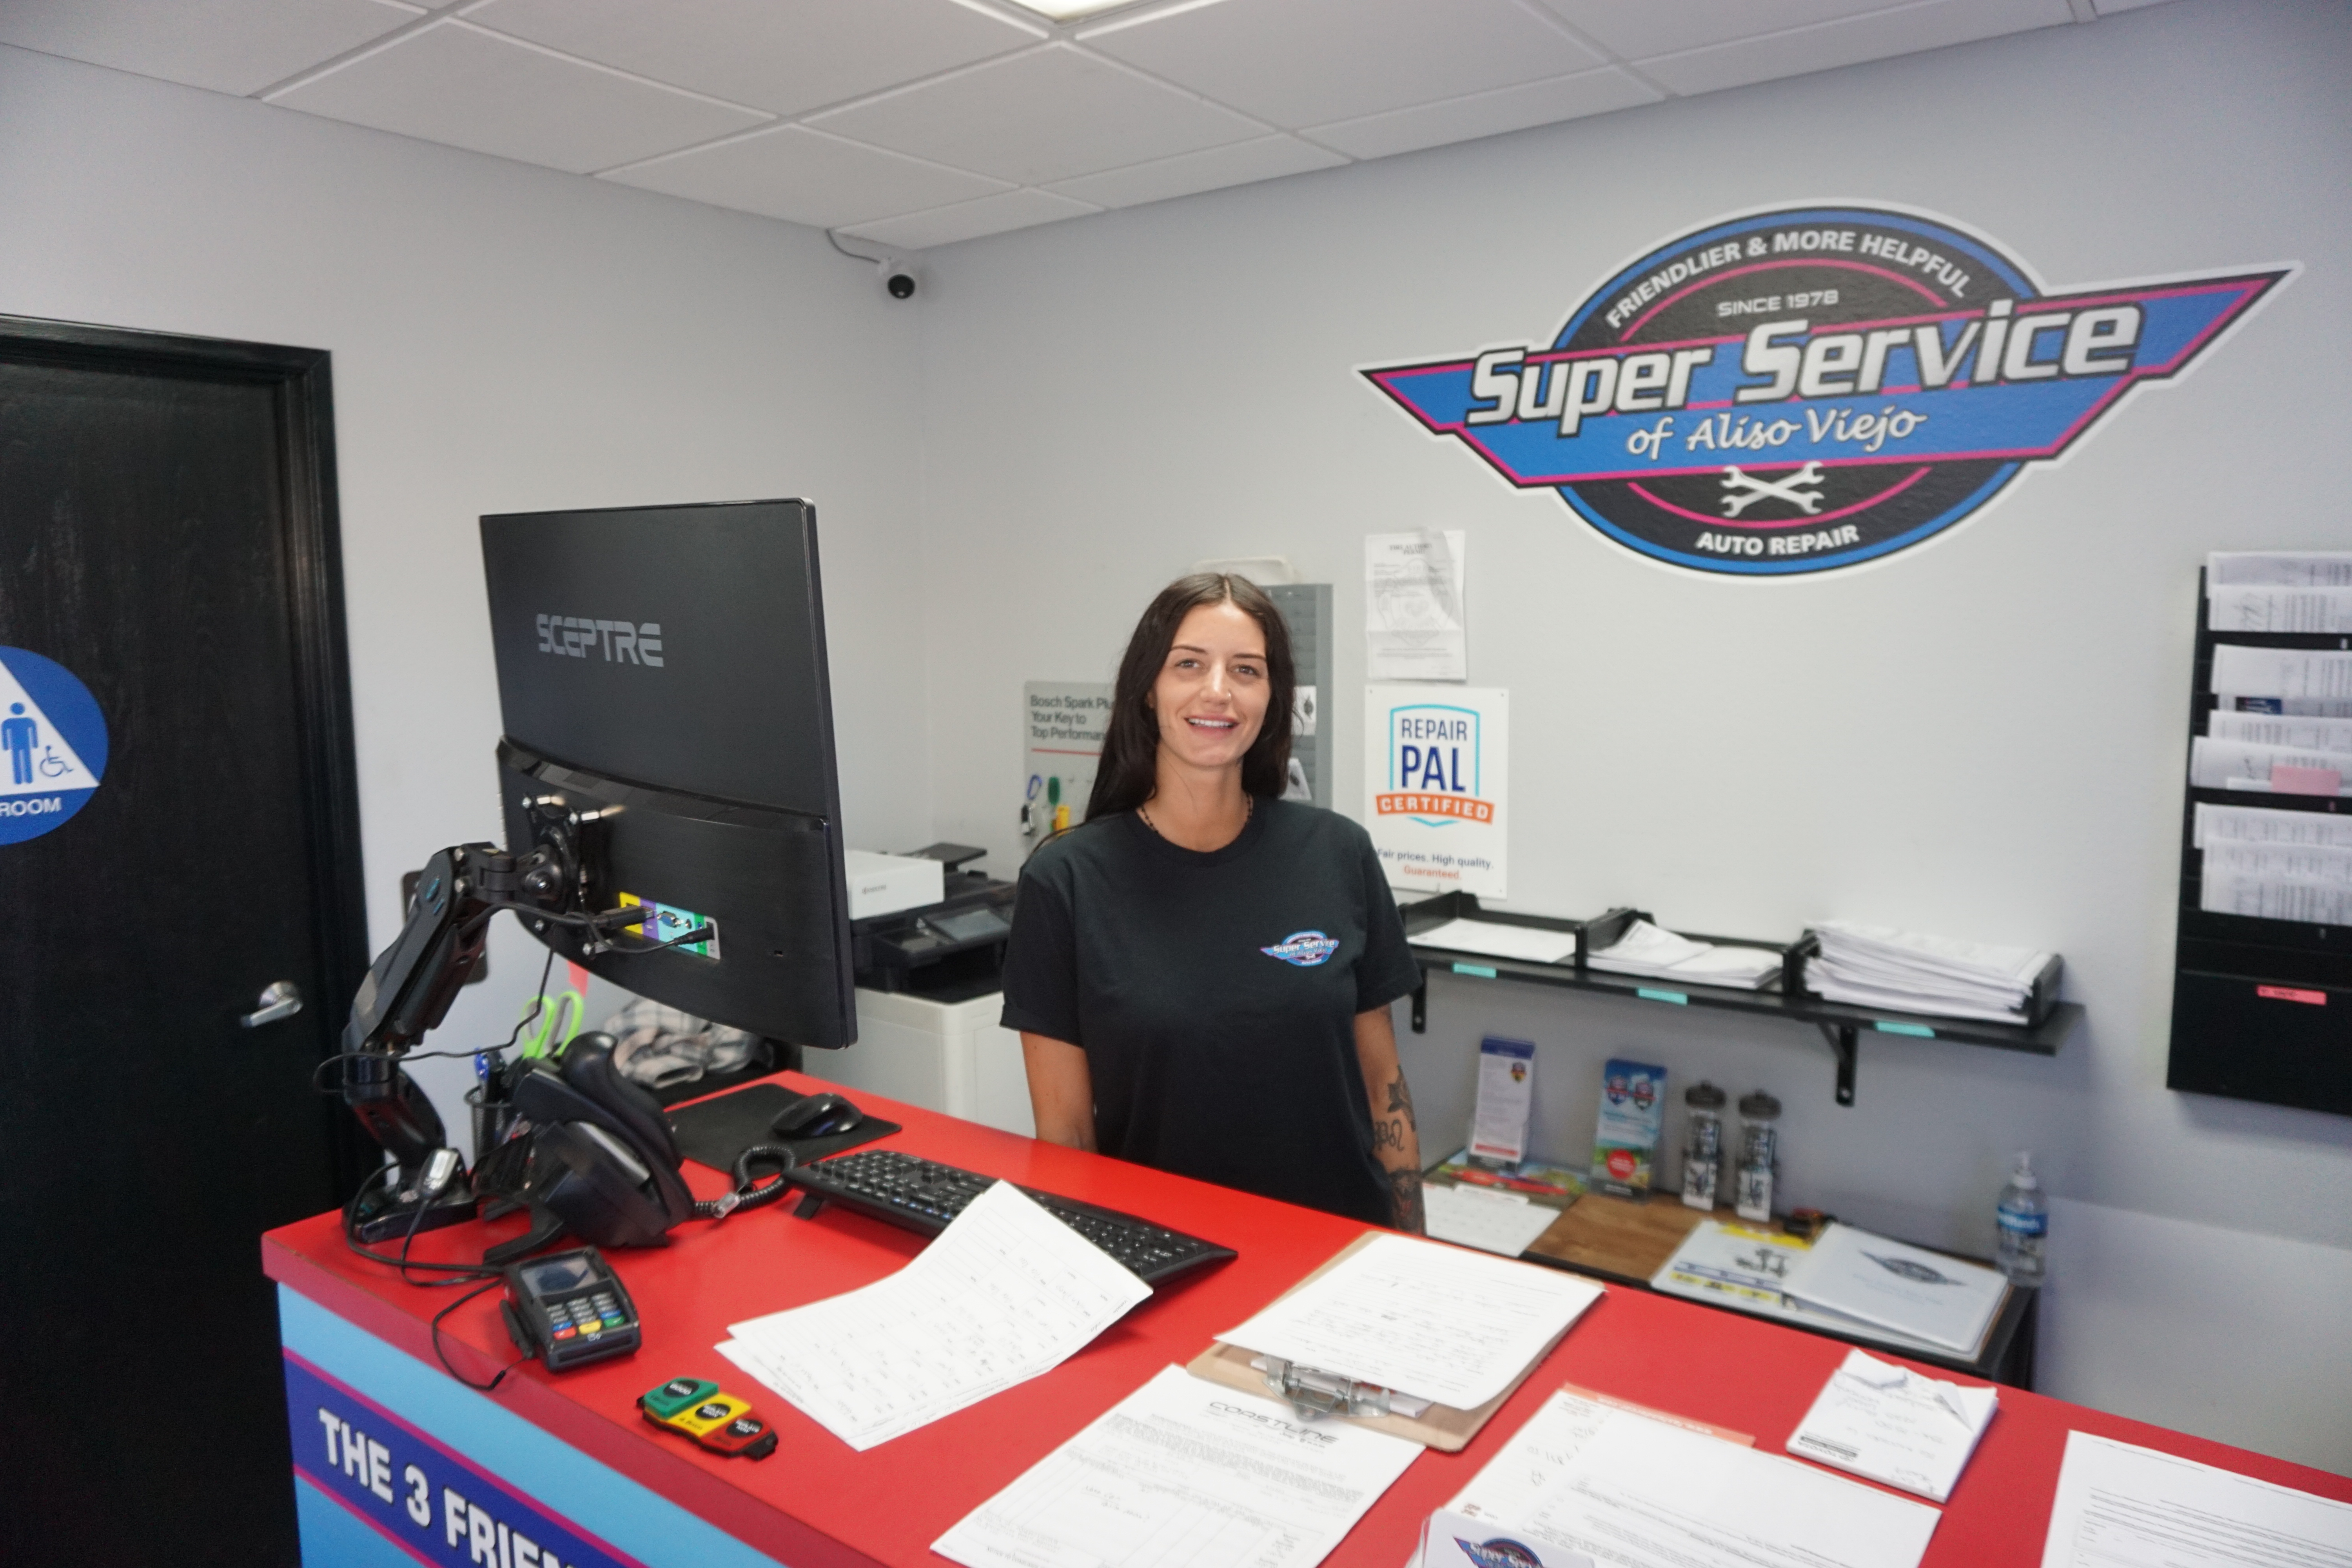 About Us Image - 52 | Super Service of Aliso Viejo